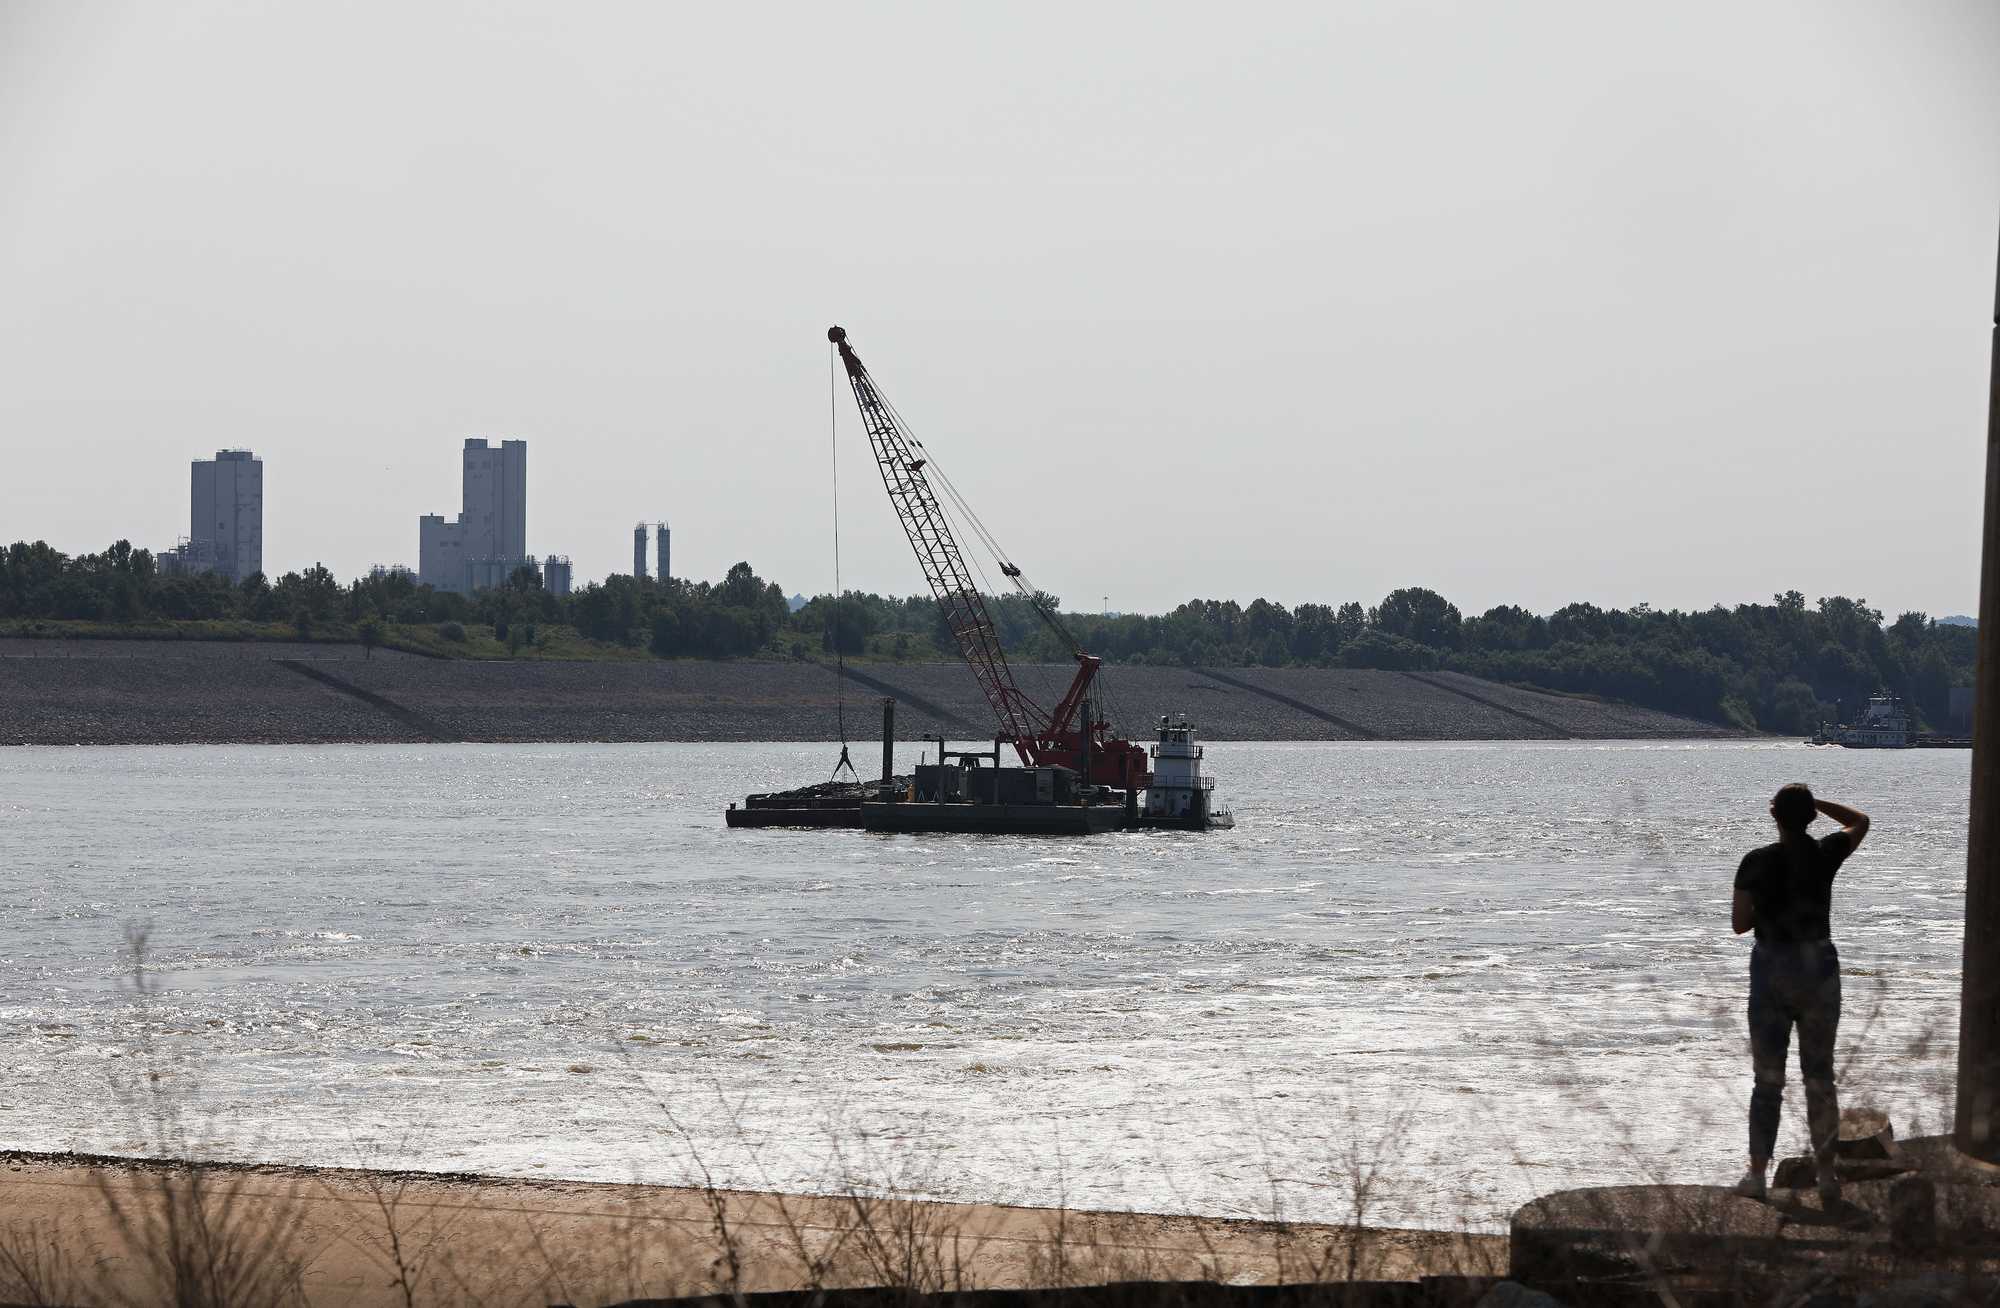 After the fog lifted on a cold morning, reporter Emma Platoff watched dredging on the Ohio River.